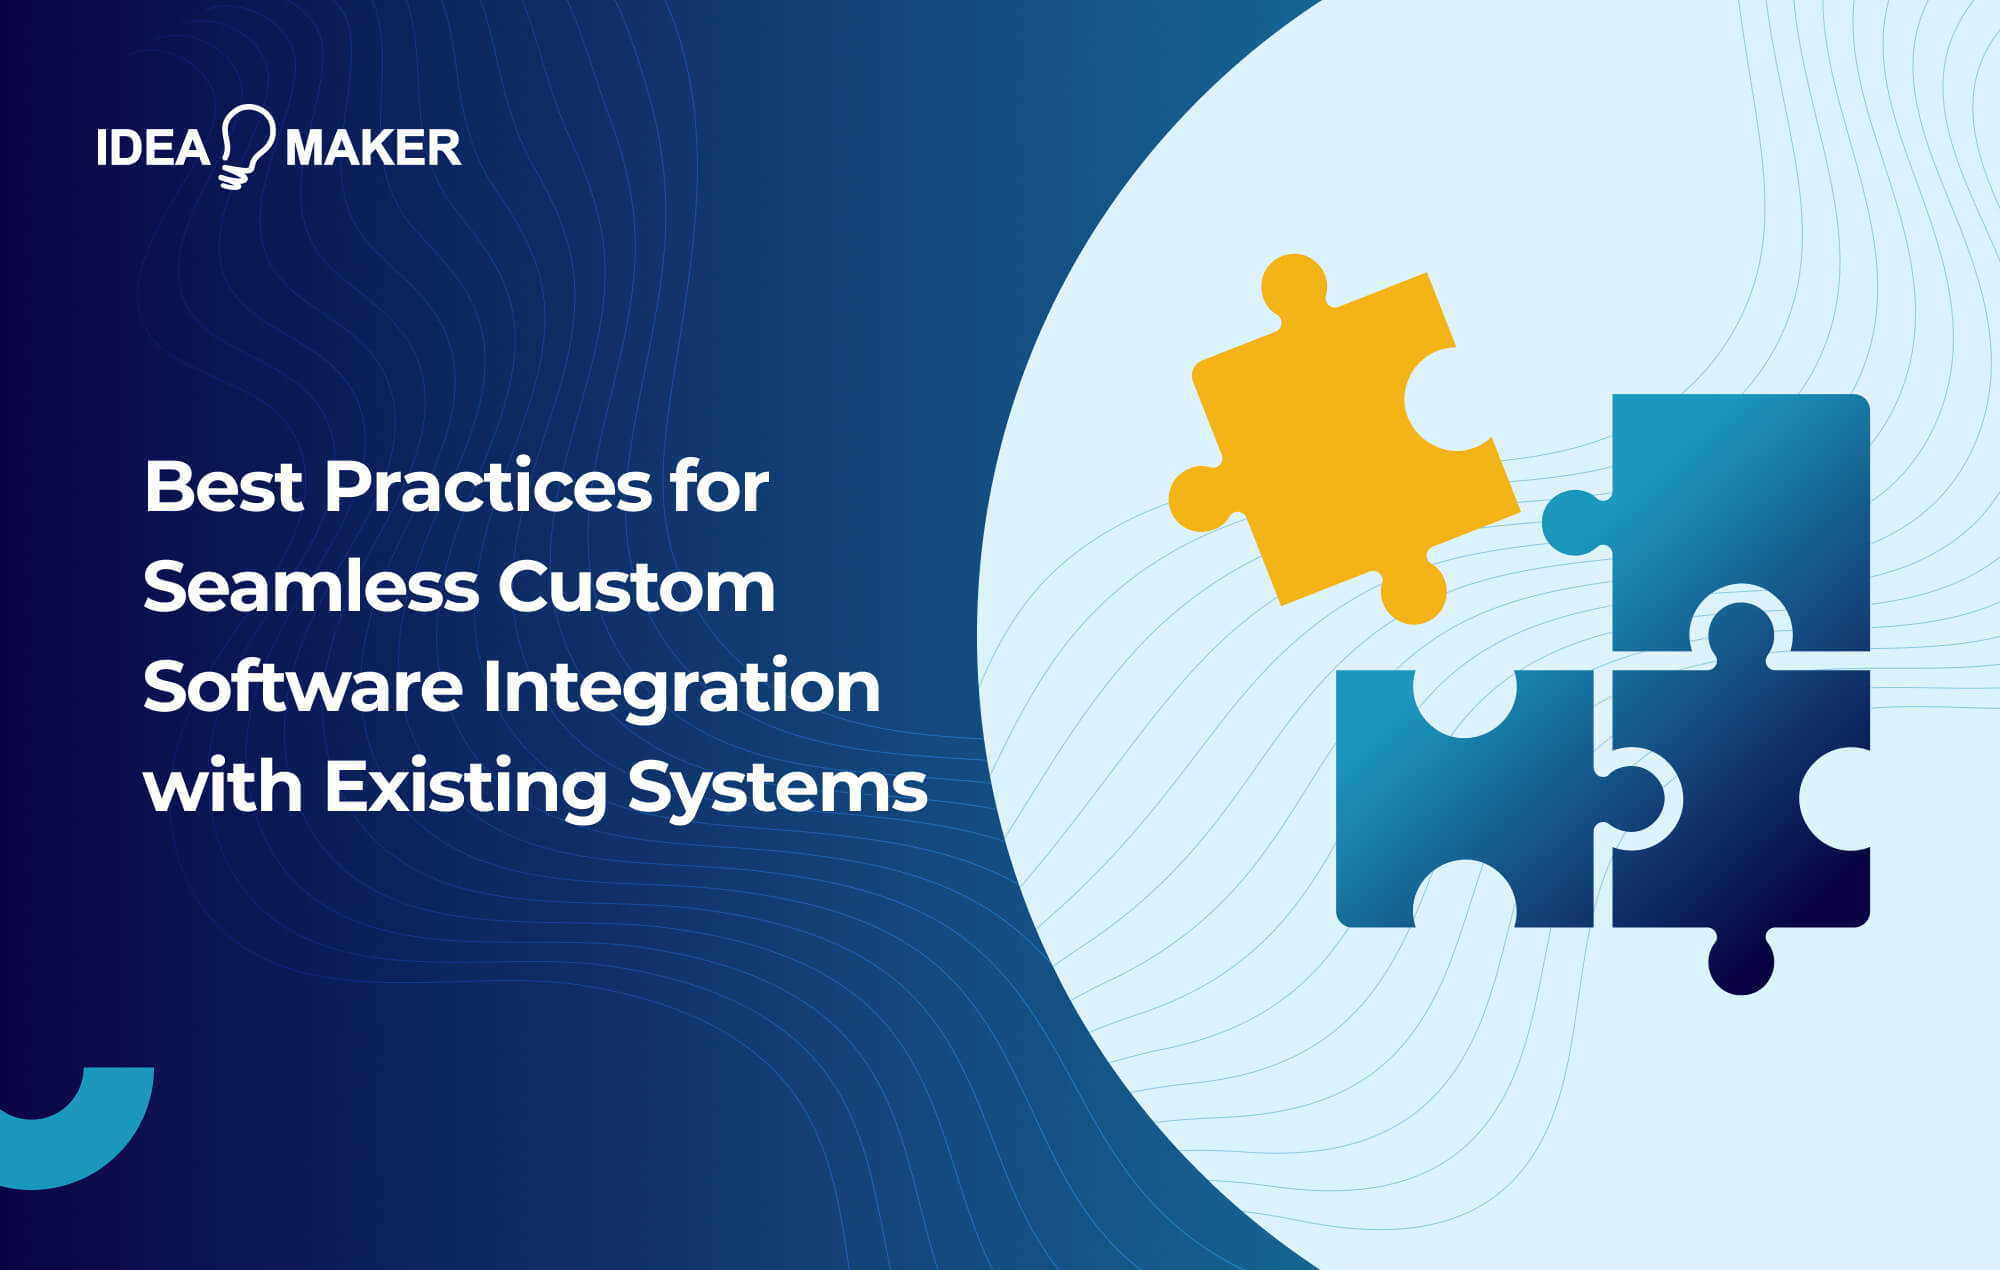 Best Practices for Seamless Custom Software Integration with